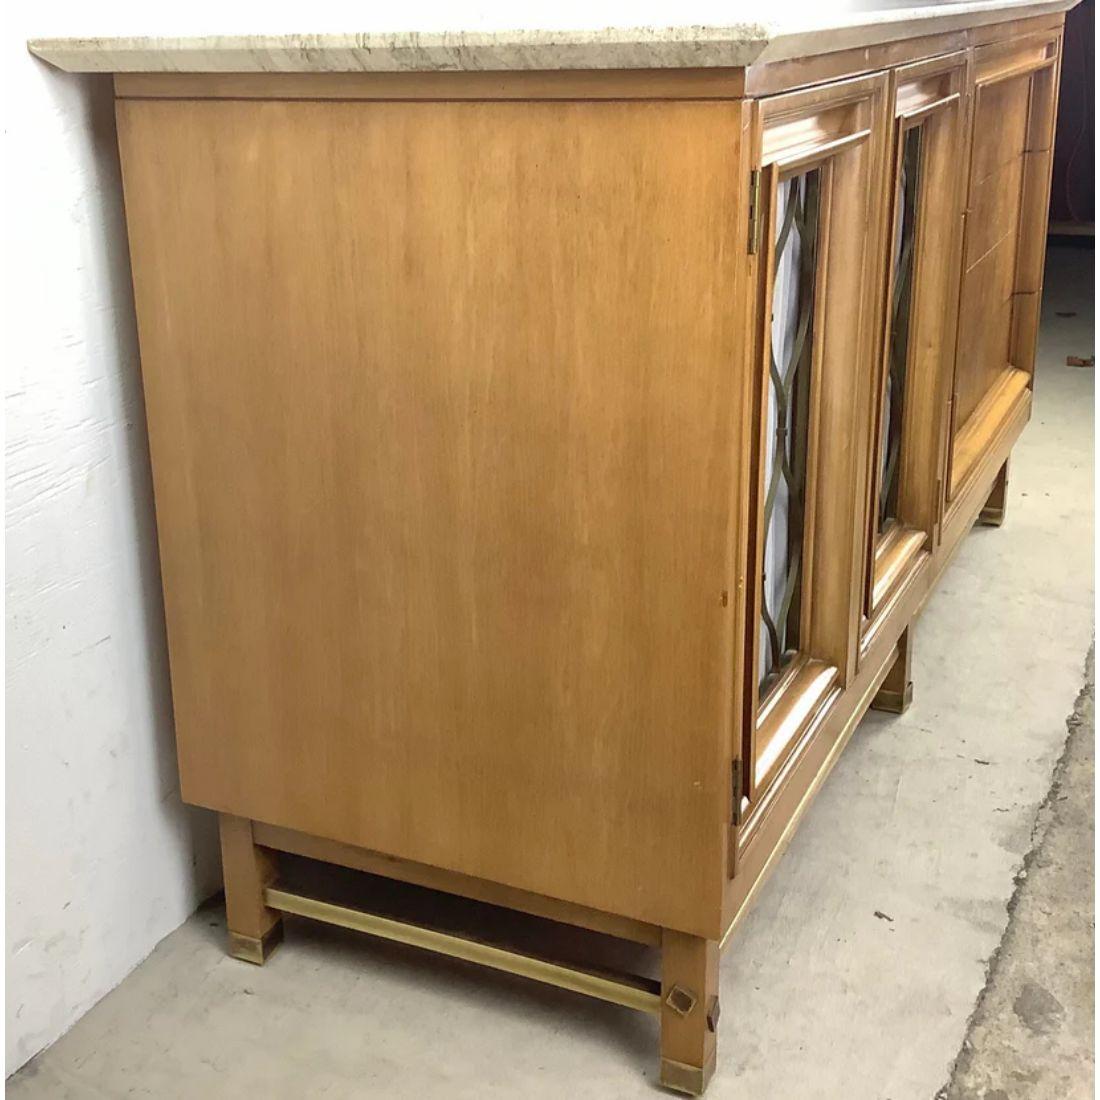 This unique Mid-Century Modern travertine top credenza features a spacious mix of three drawers and a shelved cabinet. The marble like travertine top wonderfully compliments the natural wood finish as well as the brass detail trim. Sturdy vintage